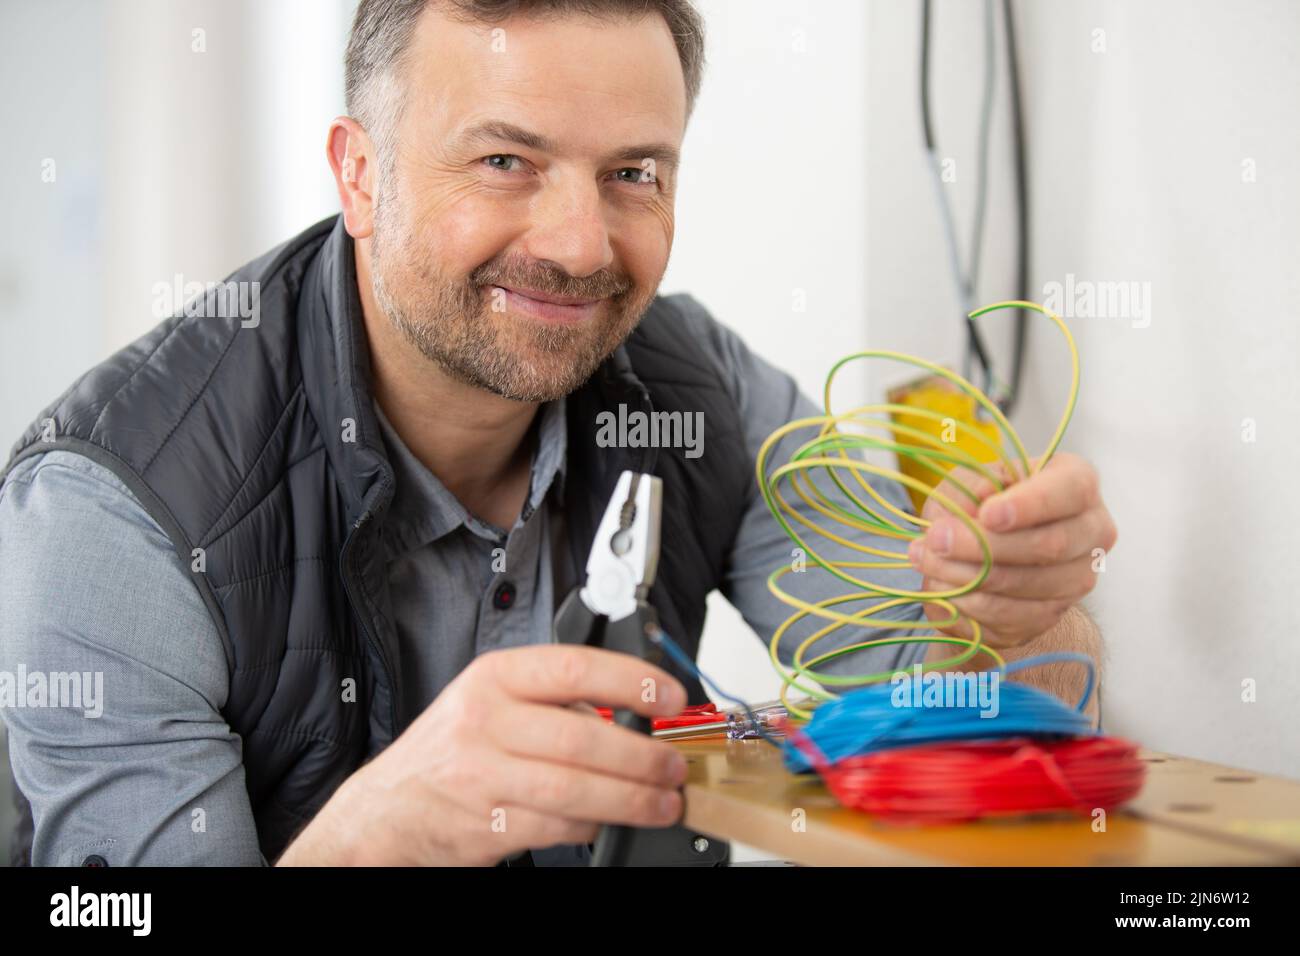 electrician working with cables and assembling new wiring Stock Photo